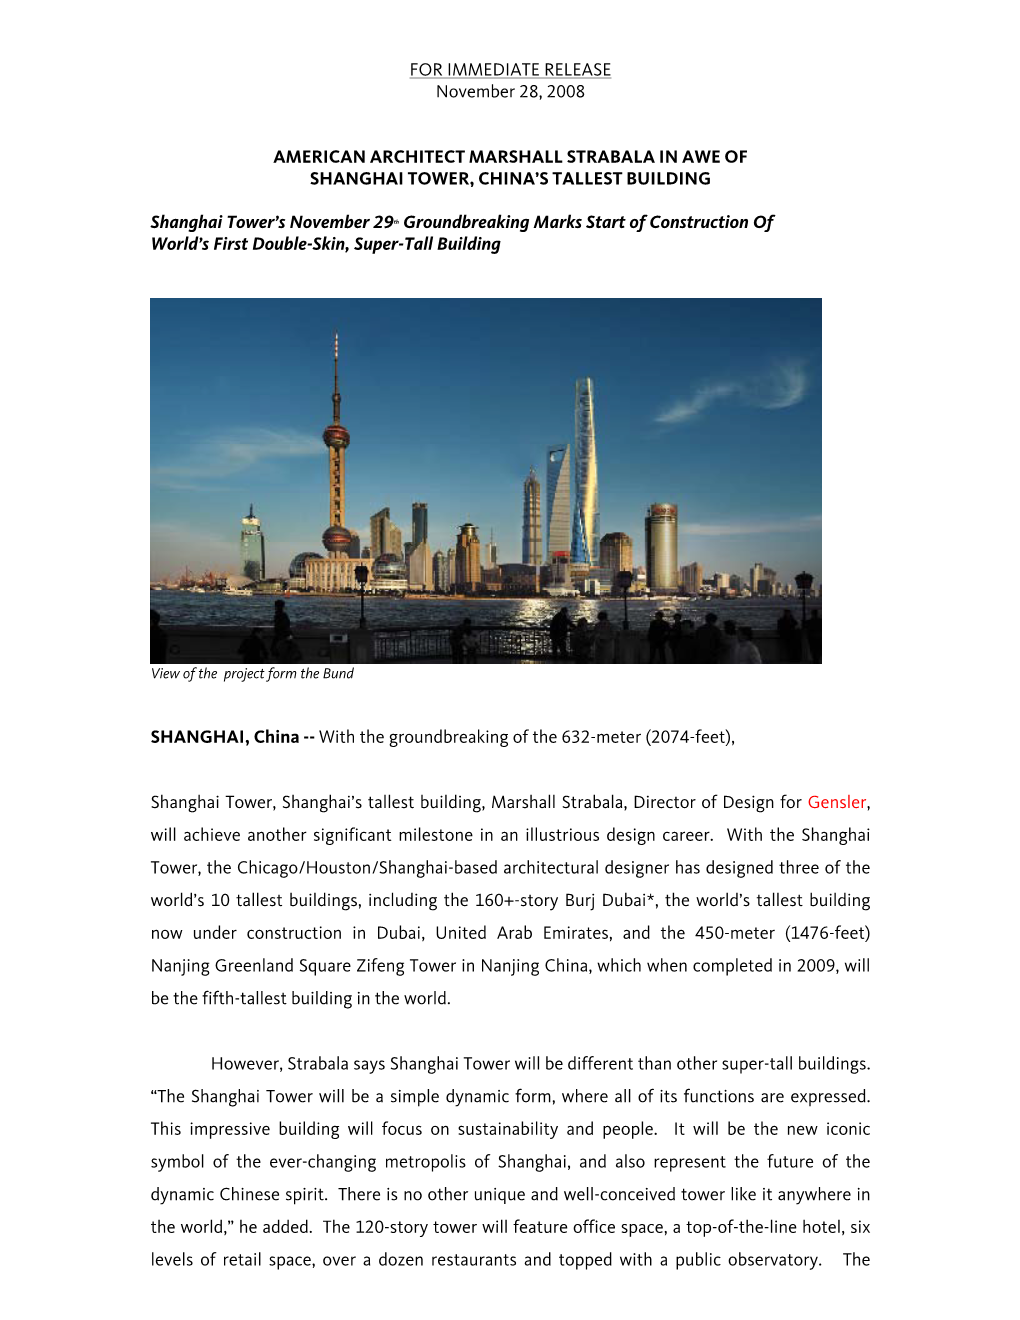 FOR IMMEDIATE RELEASE November 28, 2008 AMERICAN ARCHITECT MARSHALL STRABALA in AWE of SHANGHAI TOWER, CHINA's TALLEST BUILDIN